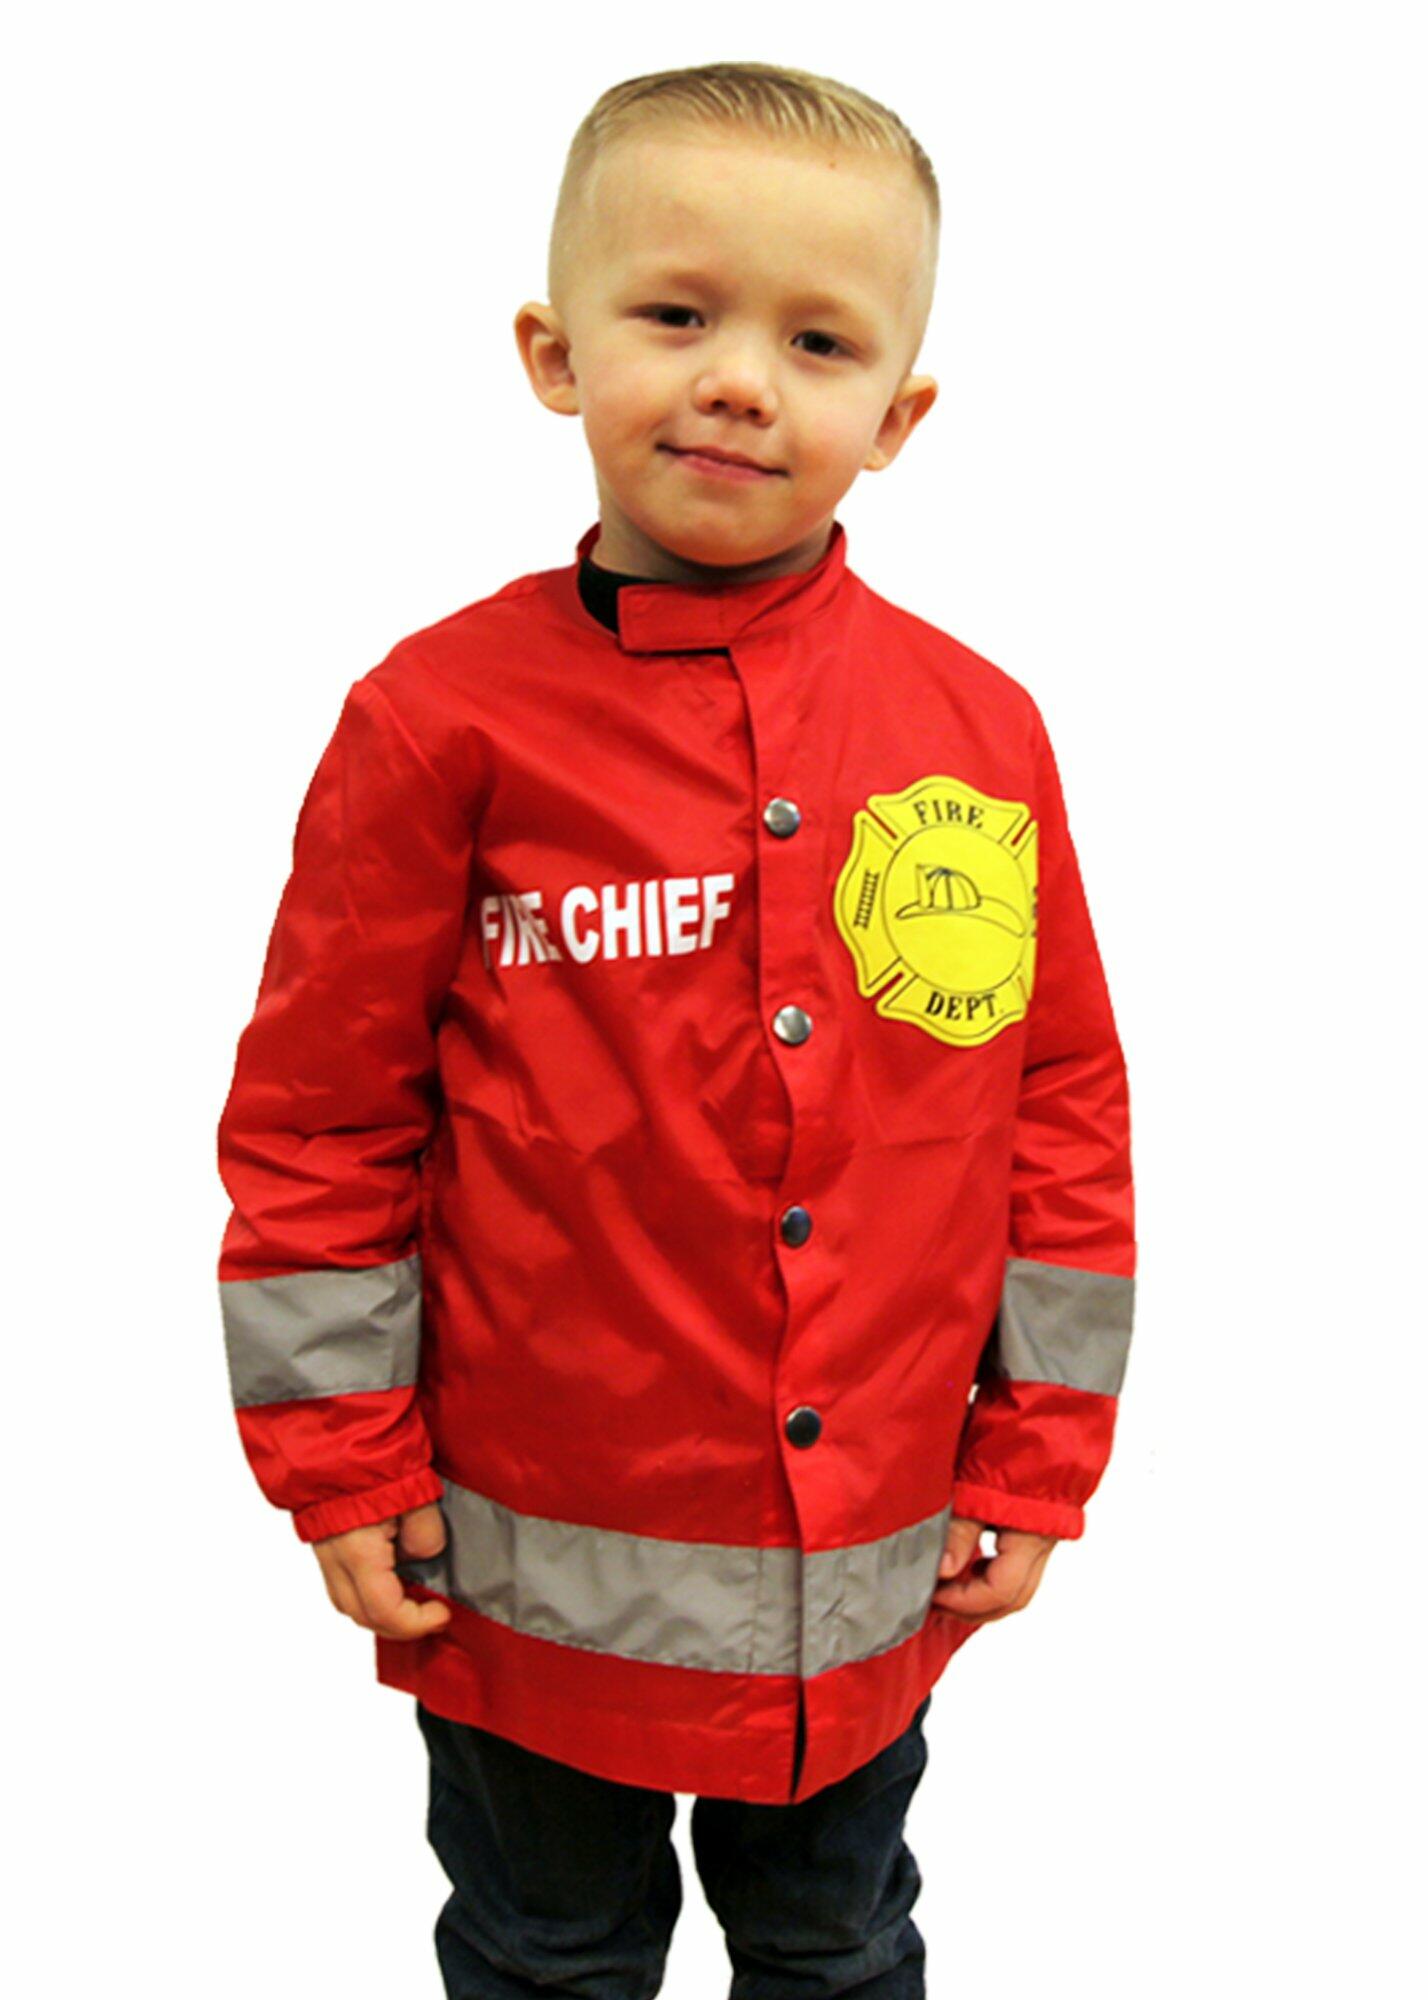 Fire Chief Jacket